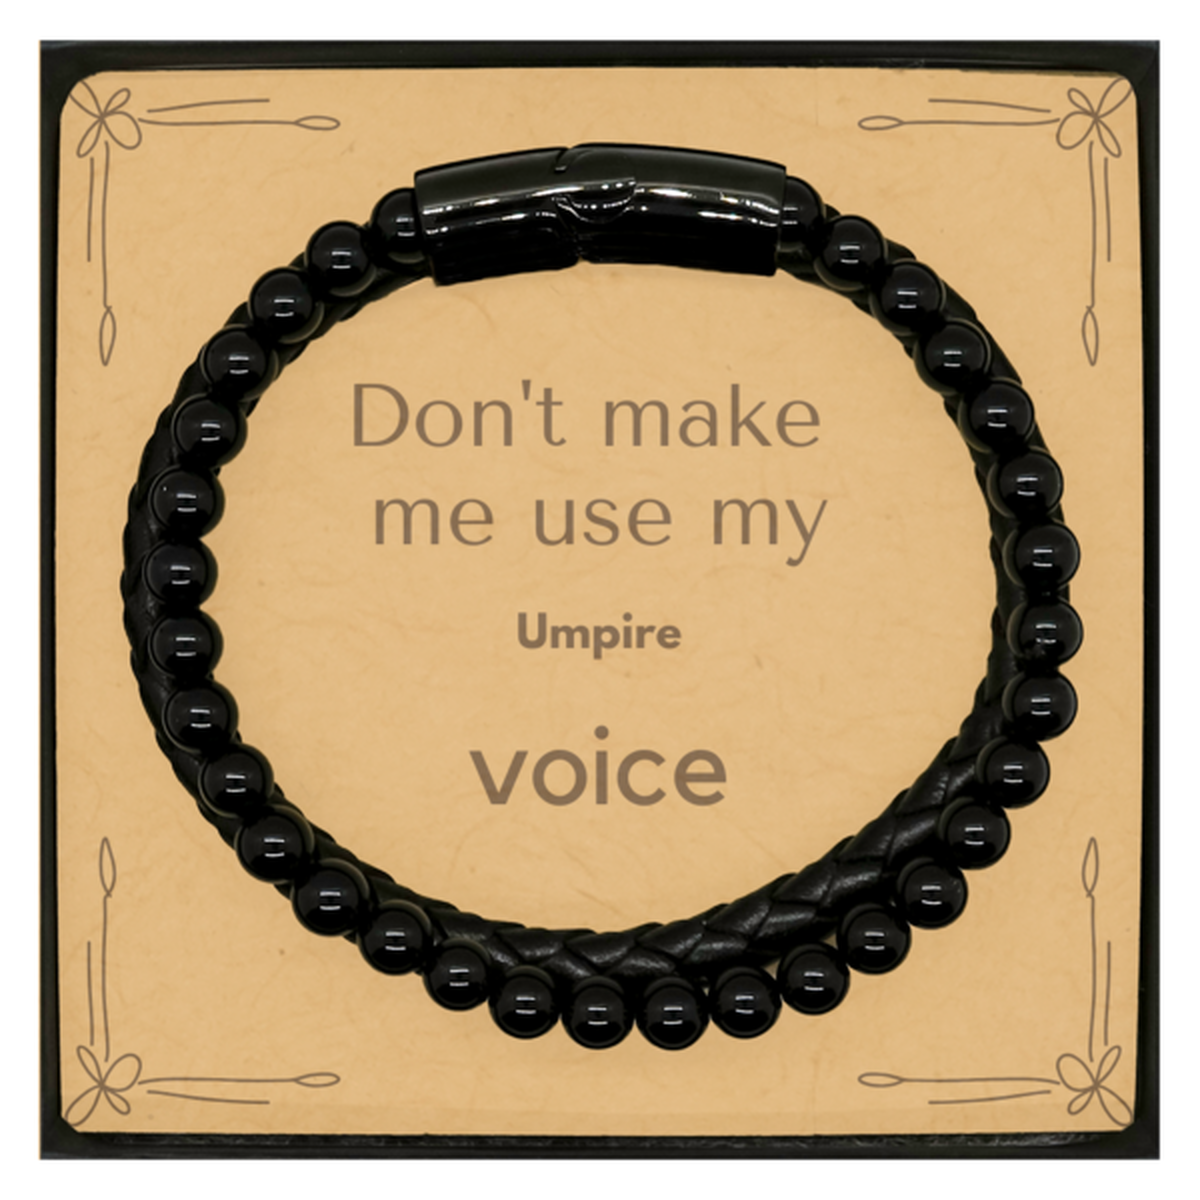 Don't make me use my Umpire voice, Sarcasm Umpire Card Gifts, Christmas Umpire Stone Leather Bracelets Birthday Unique Gifts For Umpire Coworkers, Men, Women, Colleague, Friends